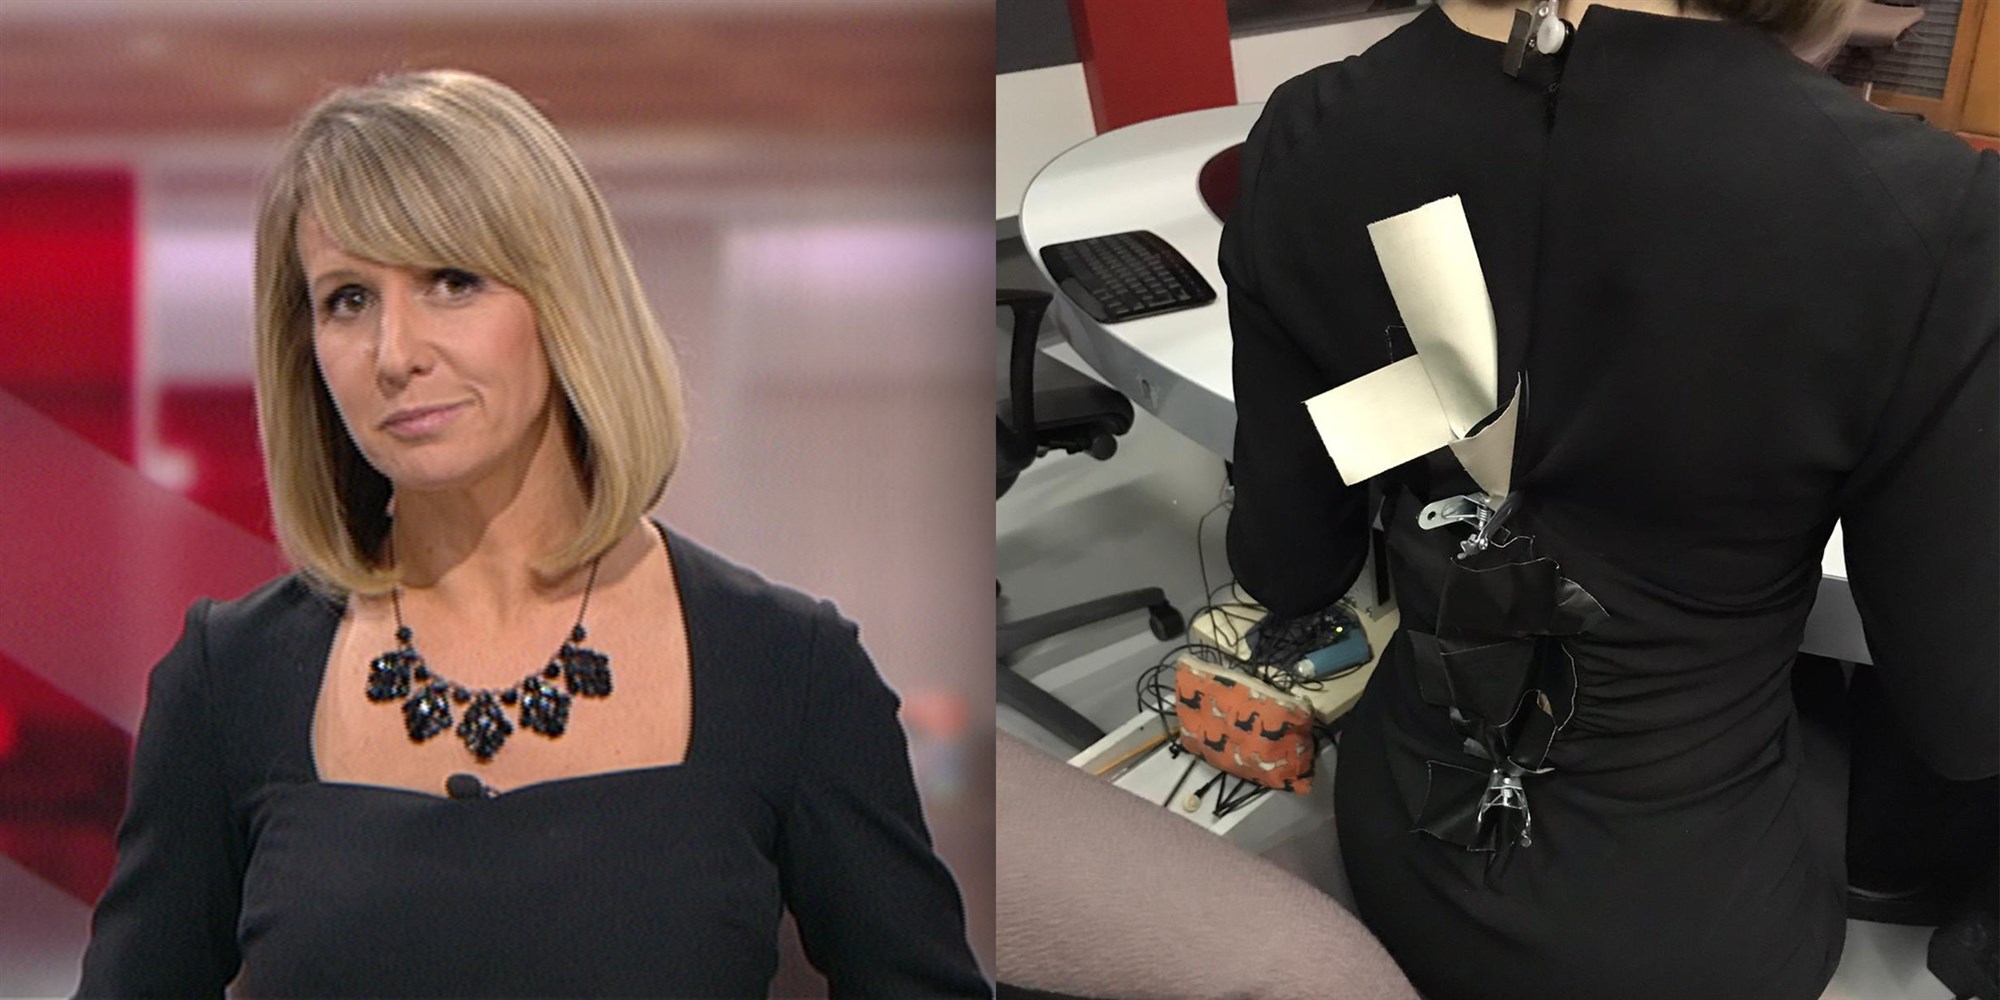 BBC presenter, 43, holds dress together with gaffer tape after it BURSTS OPEN moments before she goe